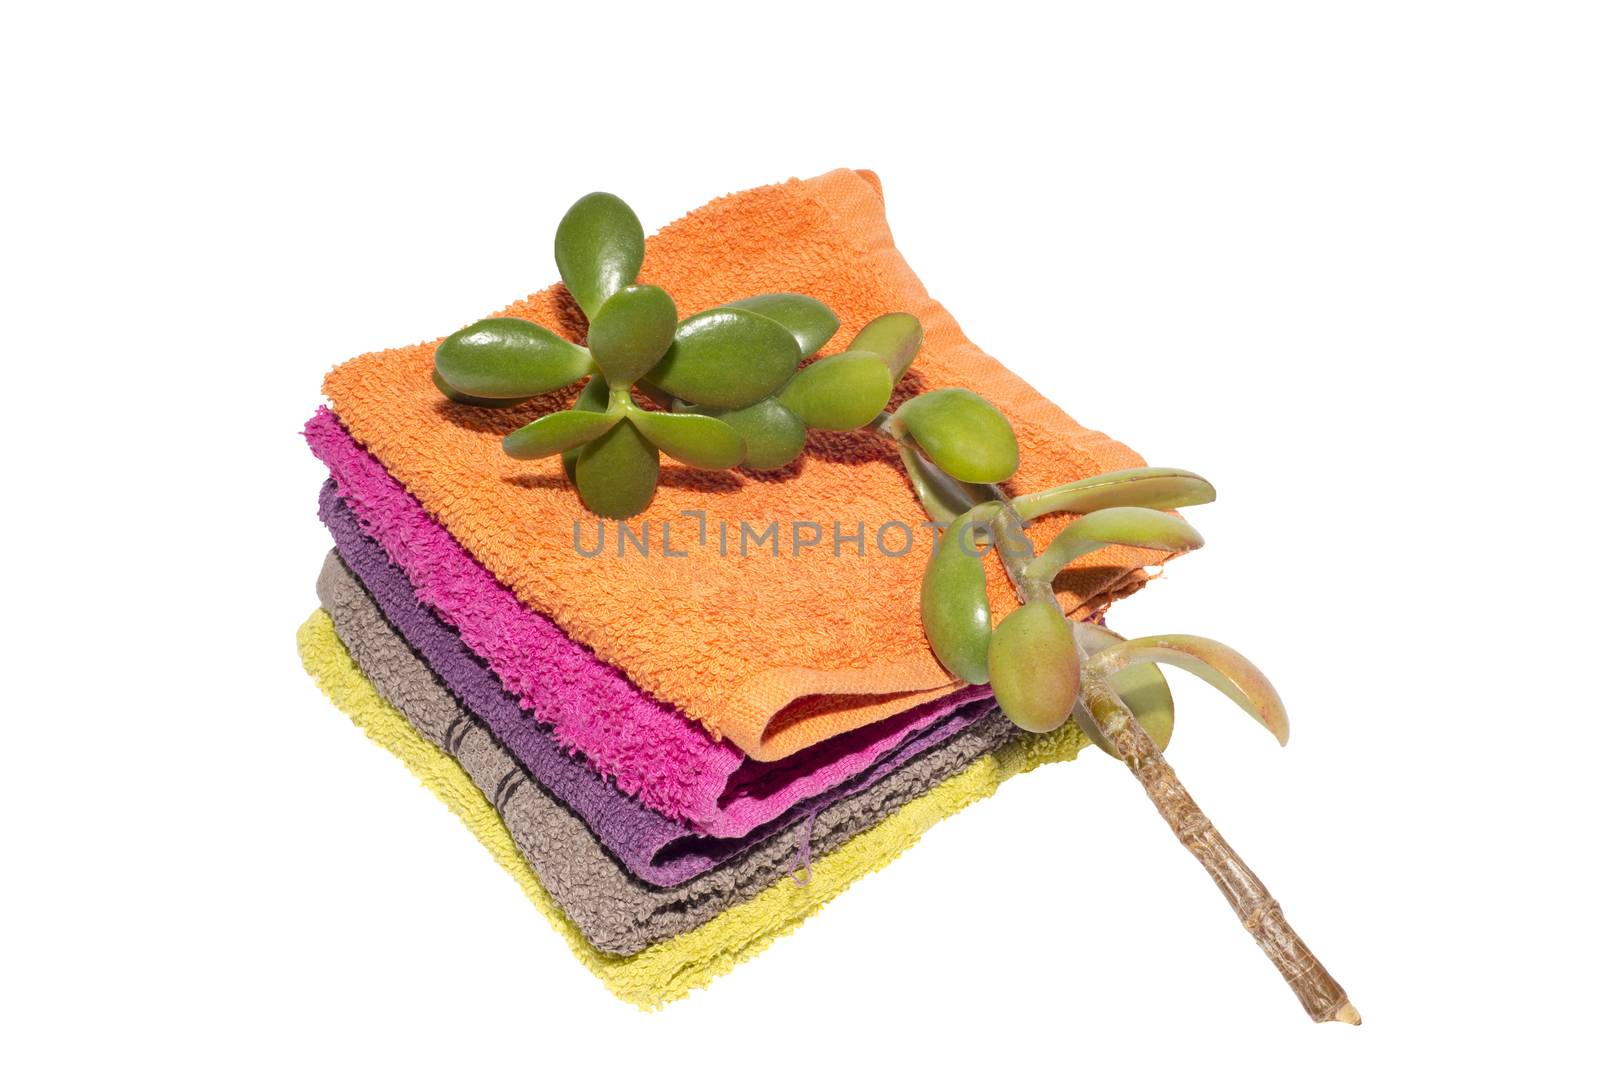 green money plant on top of facecloths by morrbyte